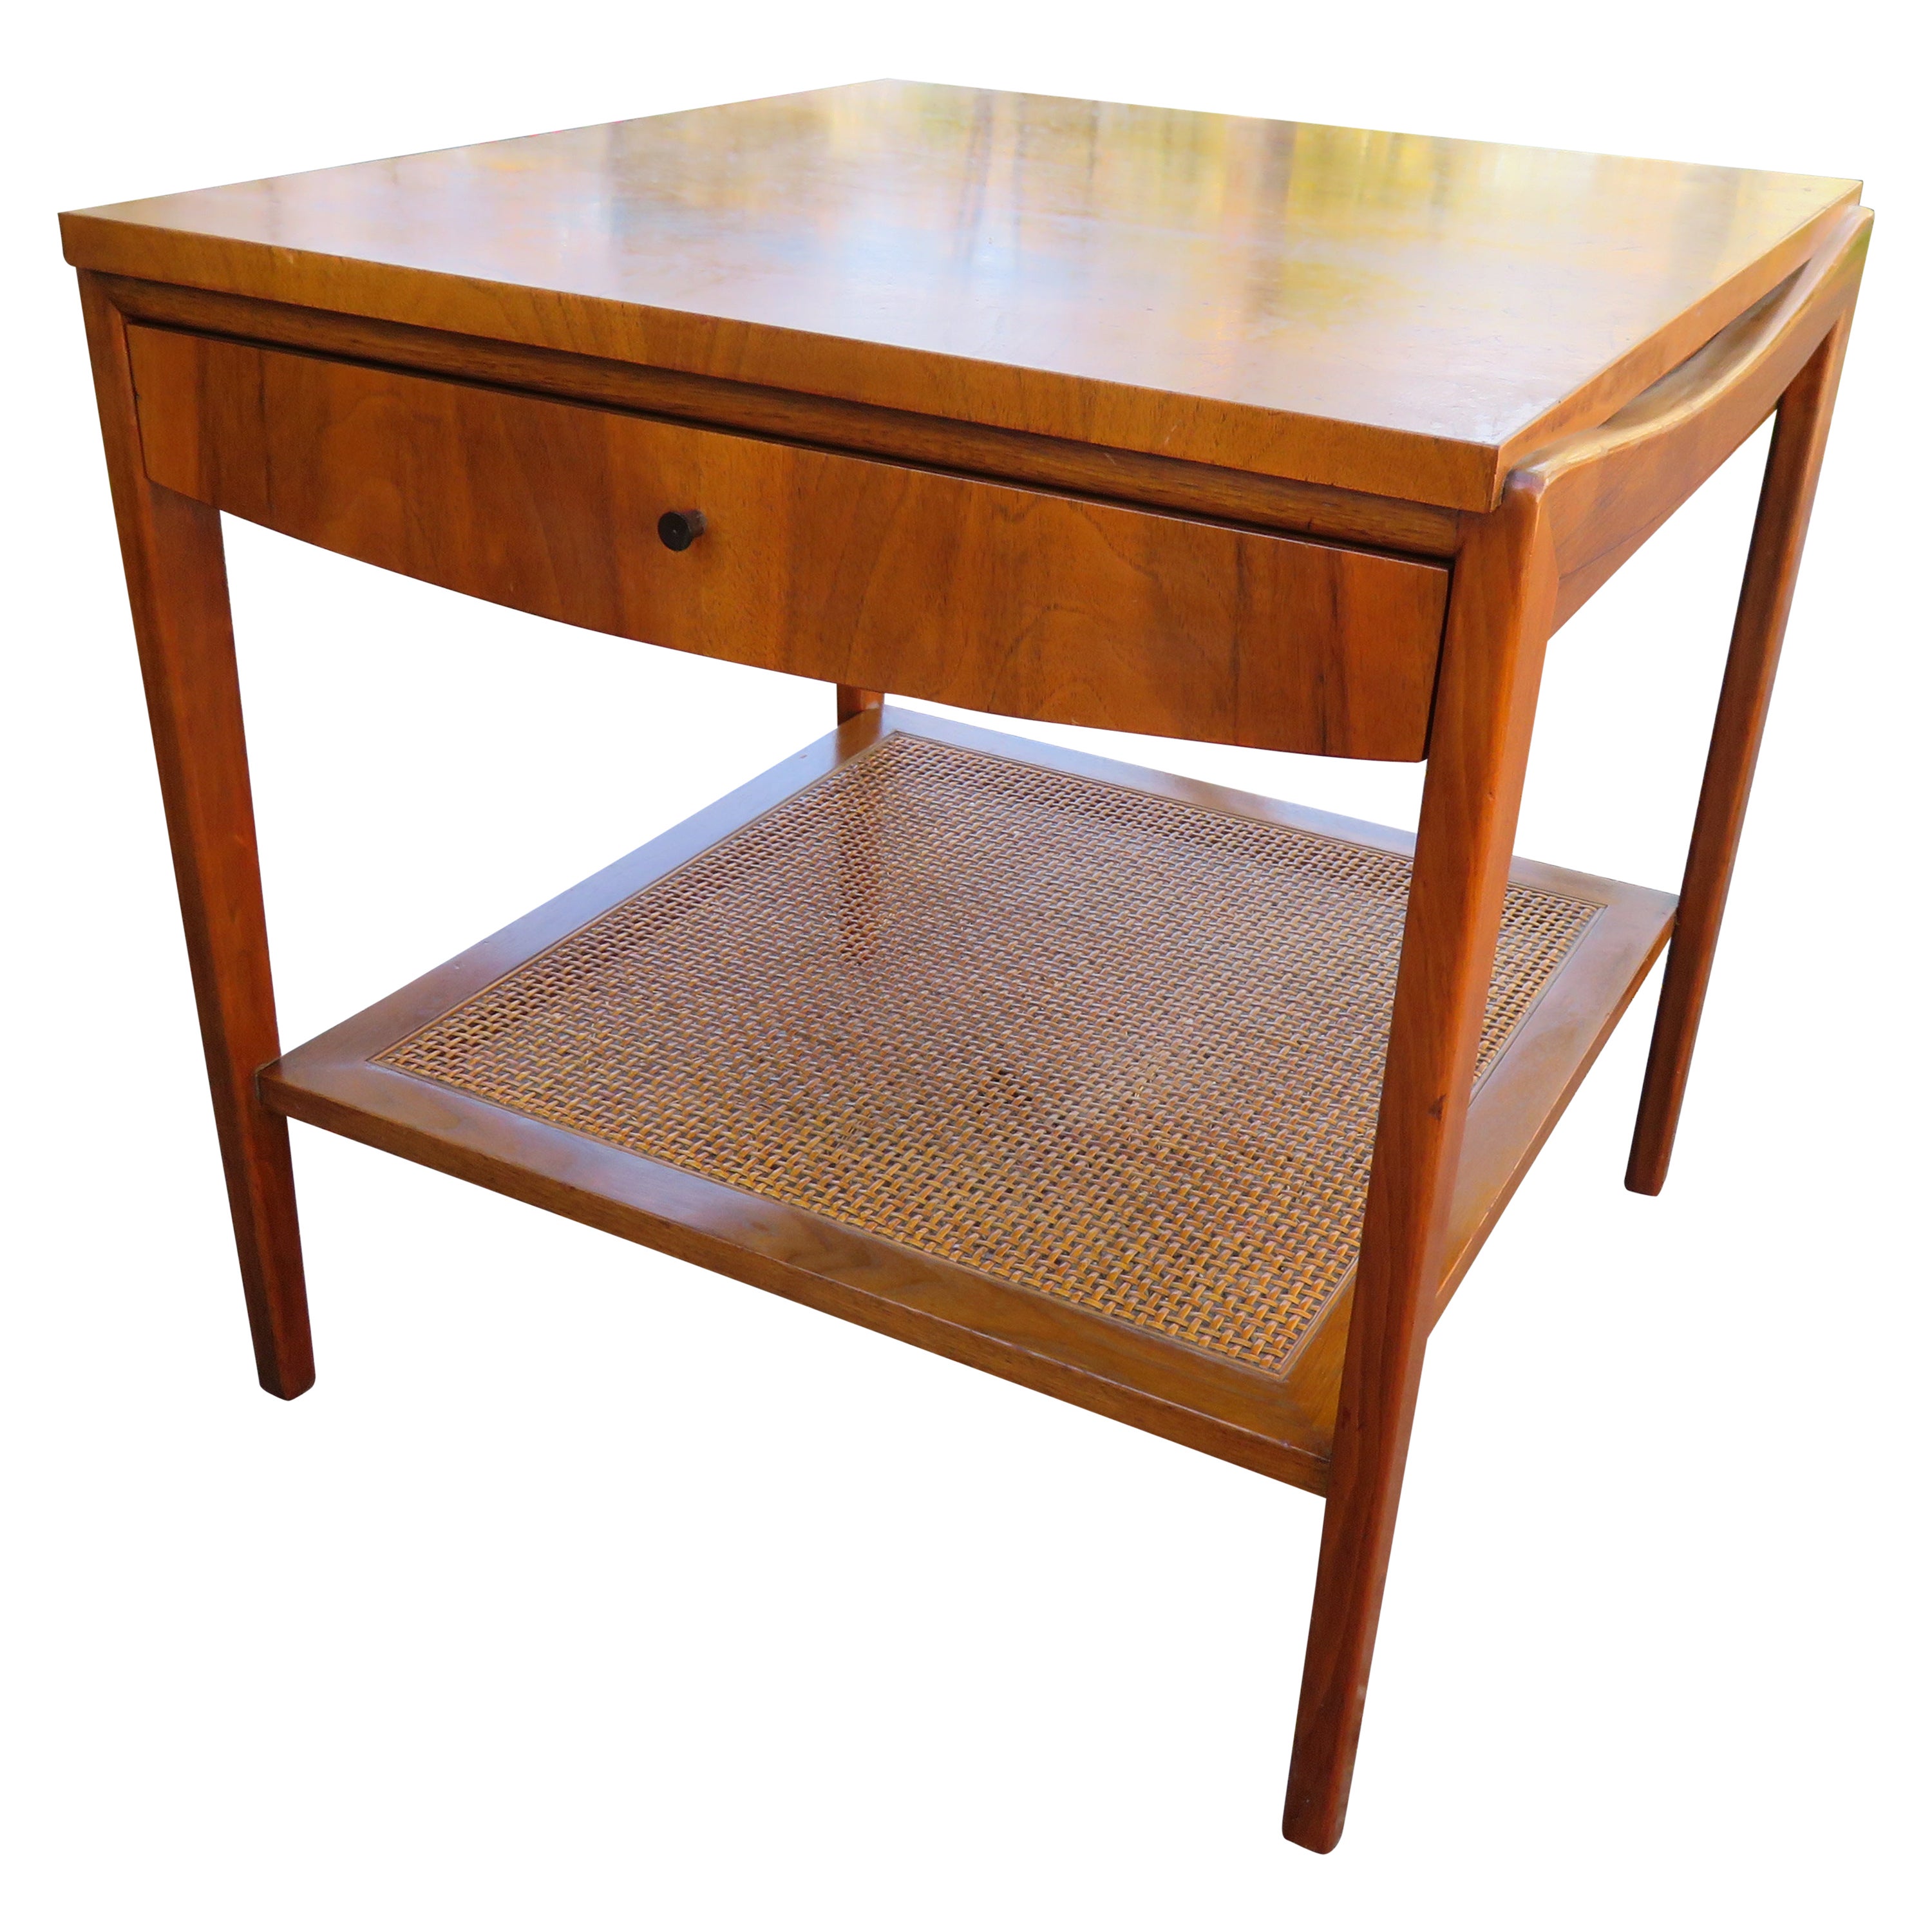 Lovely Widdicomb Walnut & Cane Single Drawer End Table Mid-Century Modern For Sale